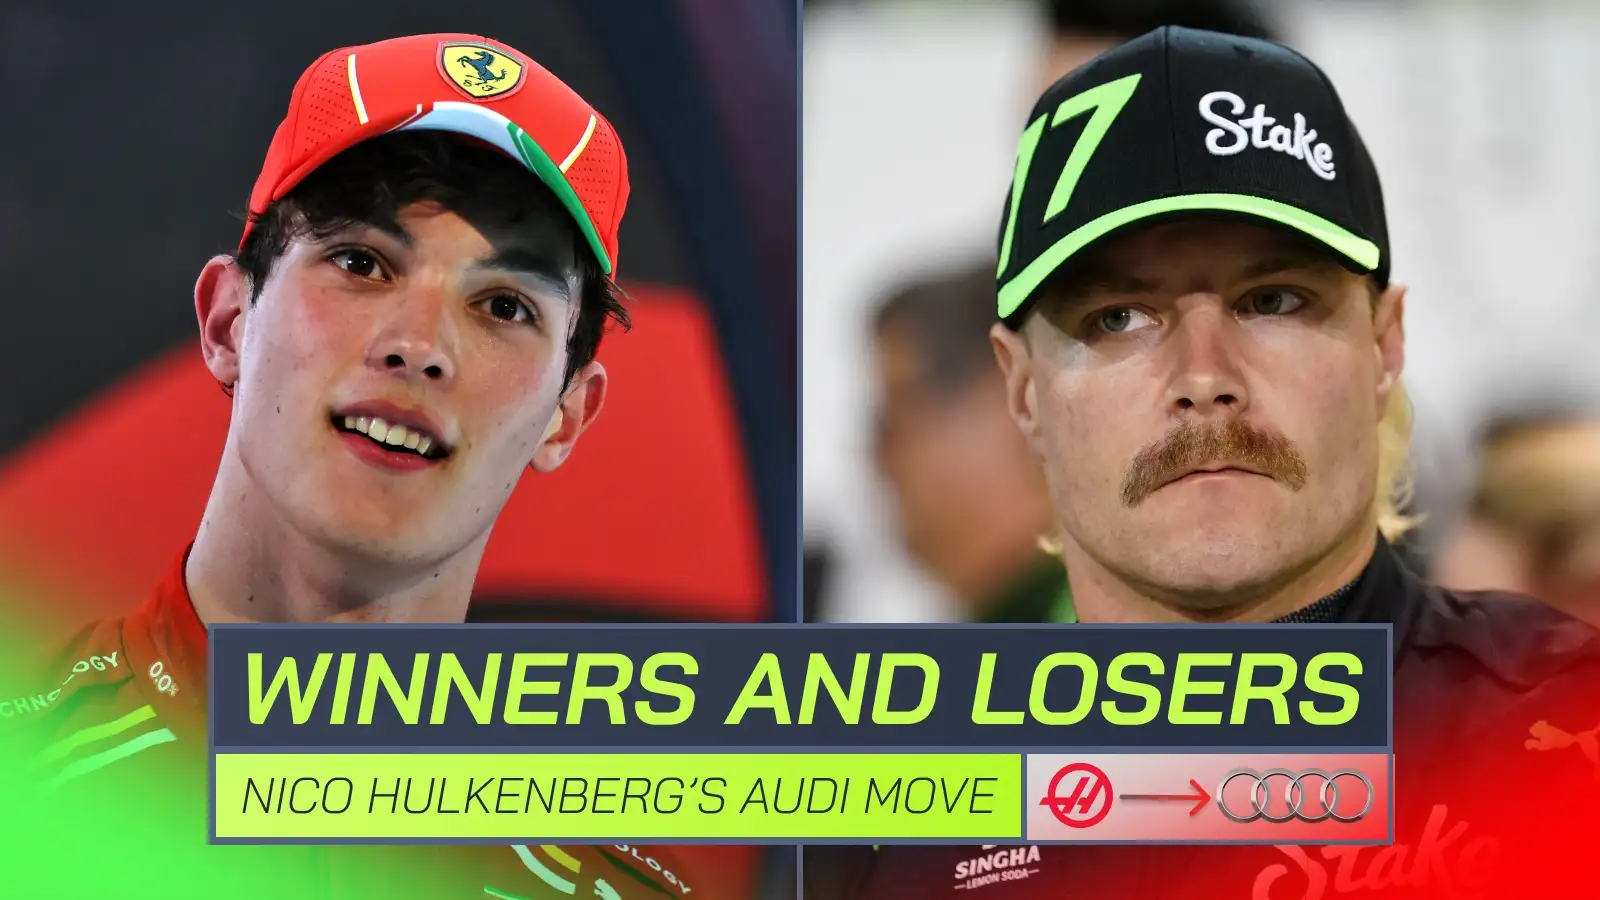 Who are the winners and losers of Nico Hulkenberg’s confirmed move to Audi?